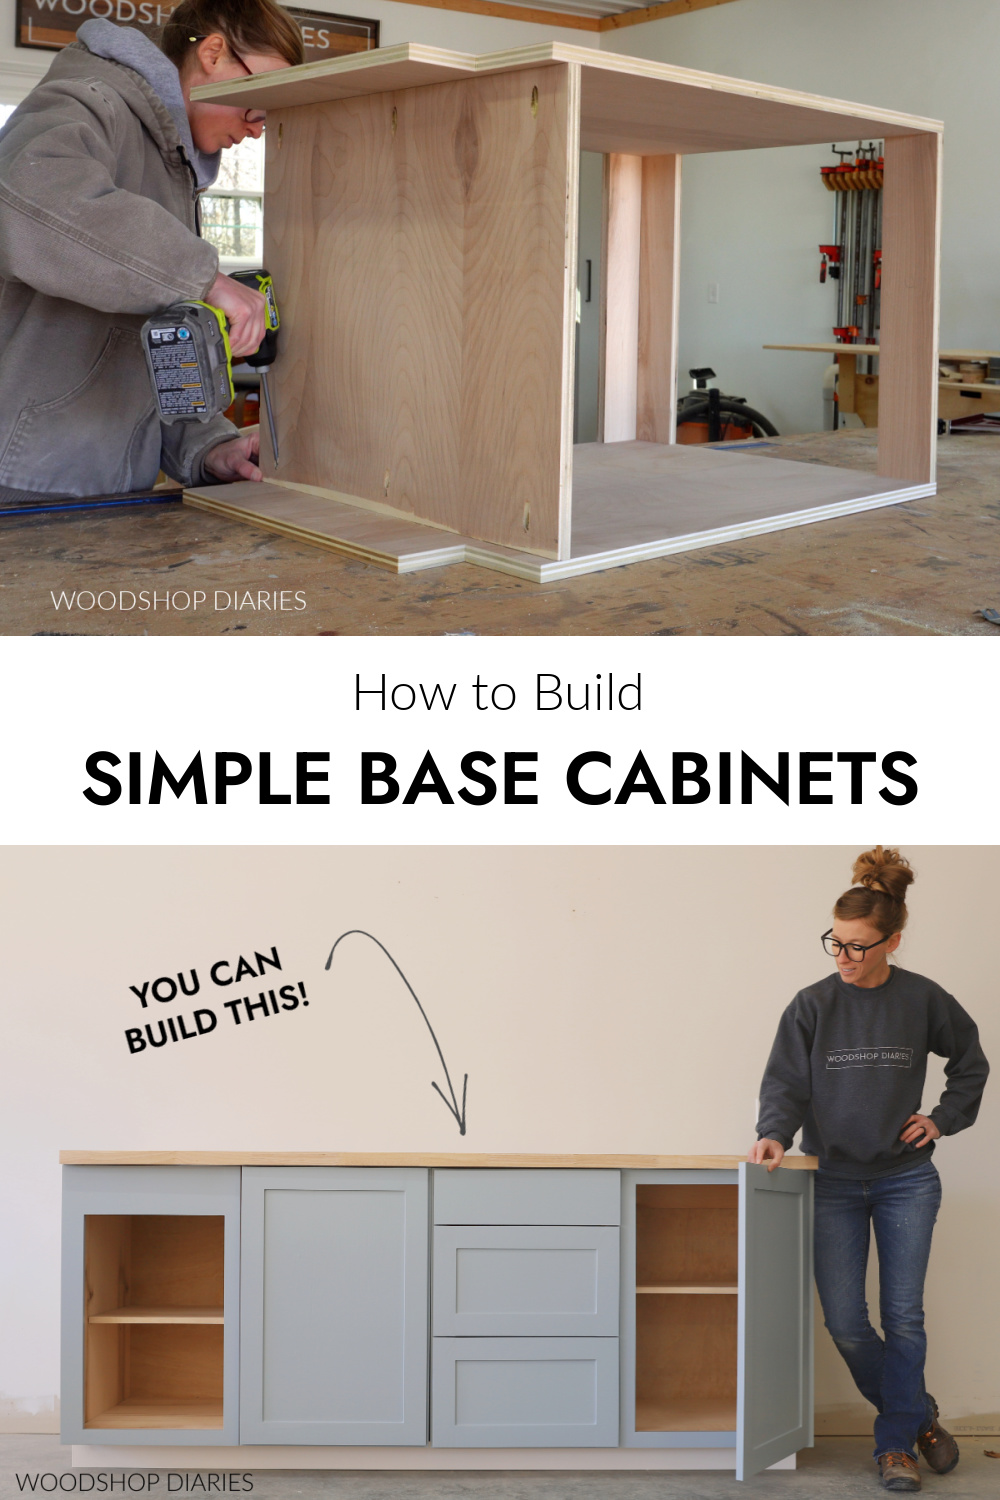 Pinterest collage image showing Shara Woodshop Diaries assembling cabinet box at top and completed DIY base cabinets against white wall at bottom with text "how to build simple base cabinets"